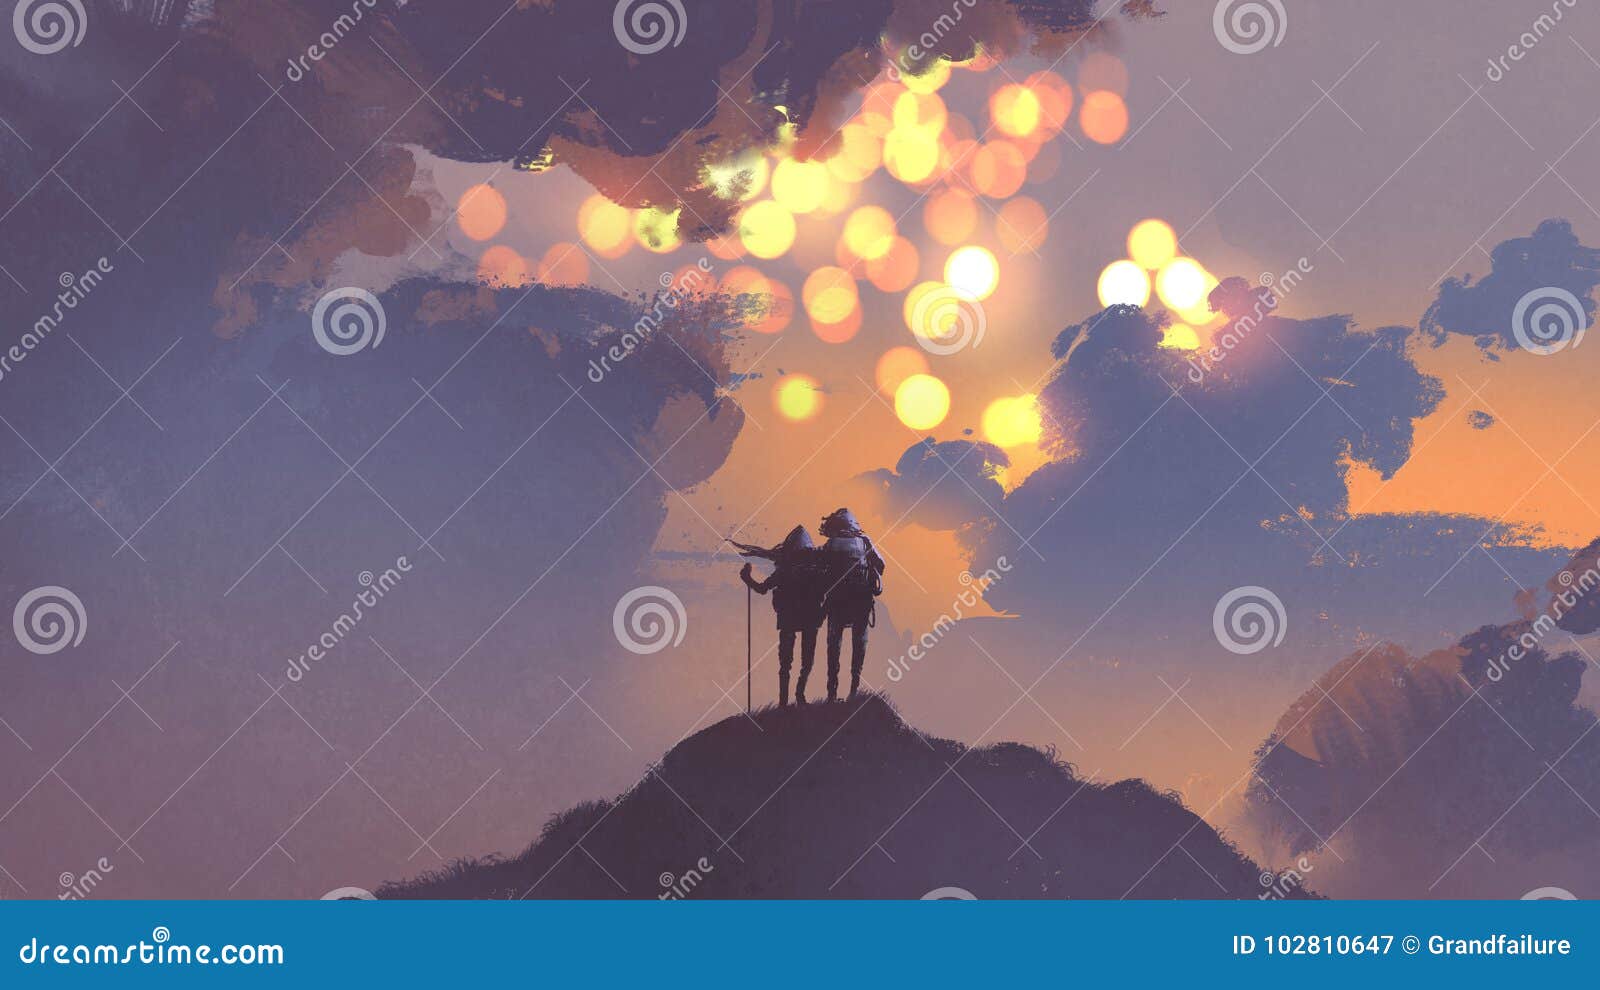 couple of hikers looking at many suns in the sky